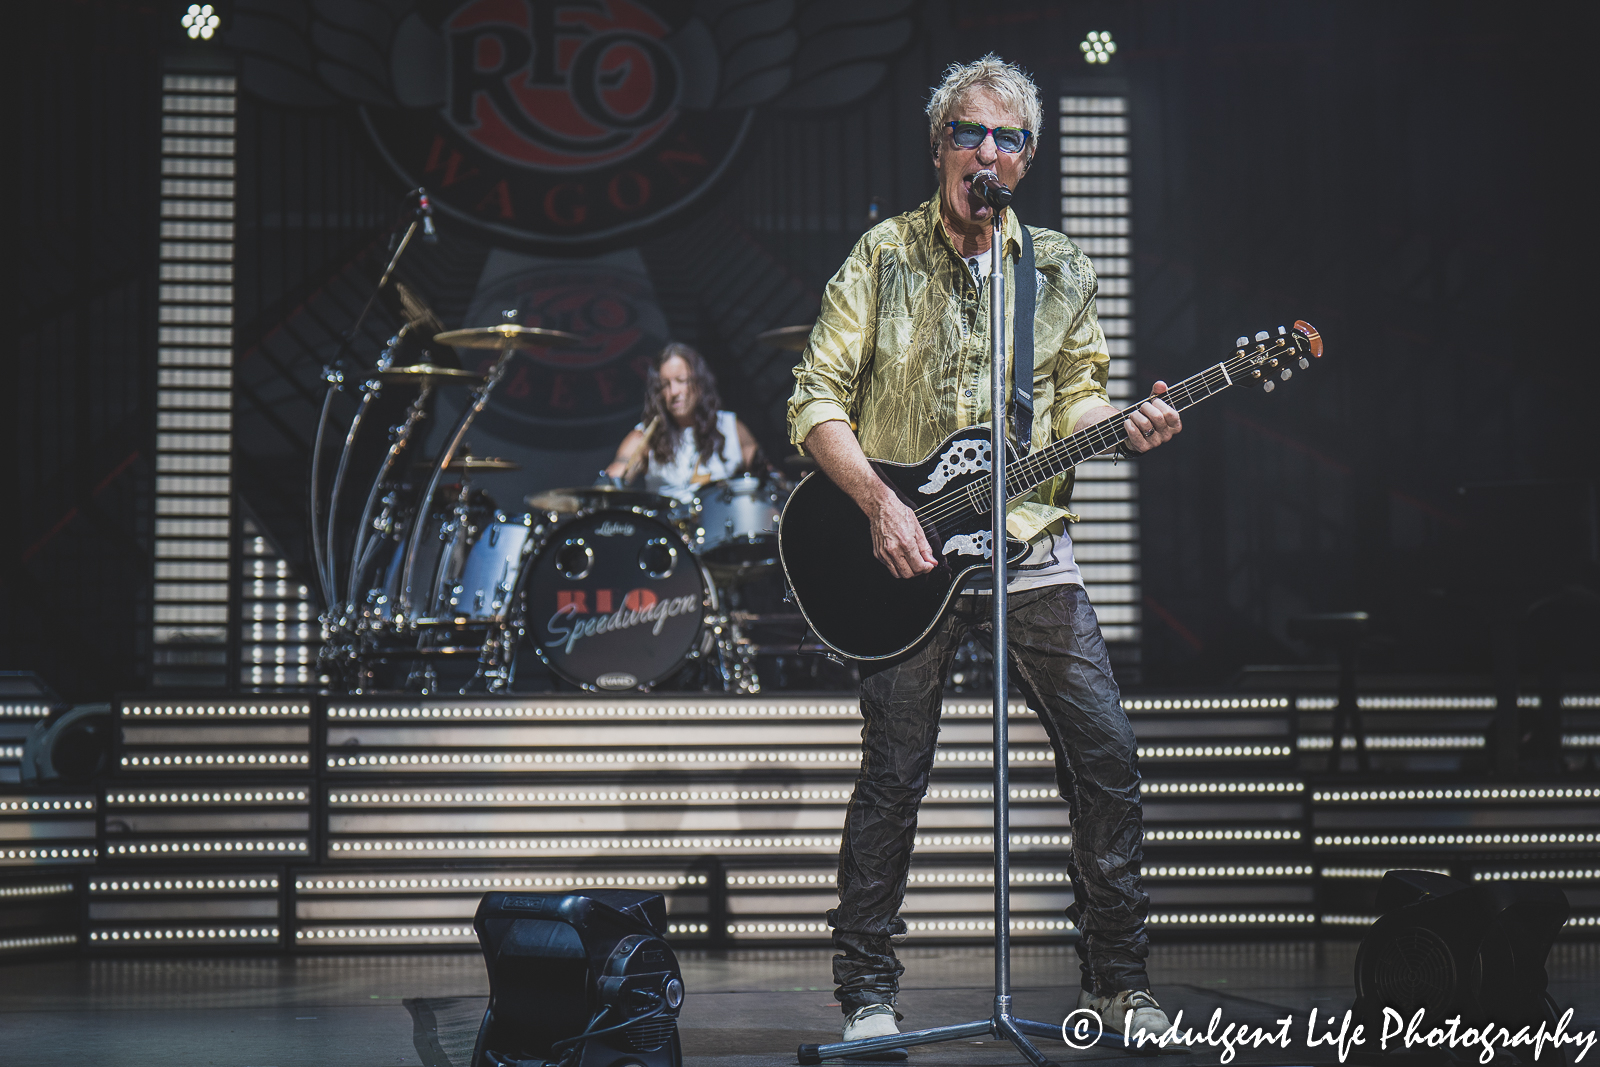 REO Speedwagon frontman and guitarist Kevin Cronin performing live with drummer Bryan Hitt at Starlight Theatre in Kansas City, MO on June 14, 2022.